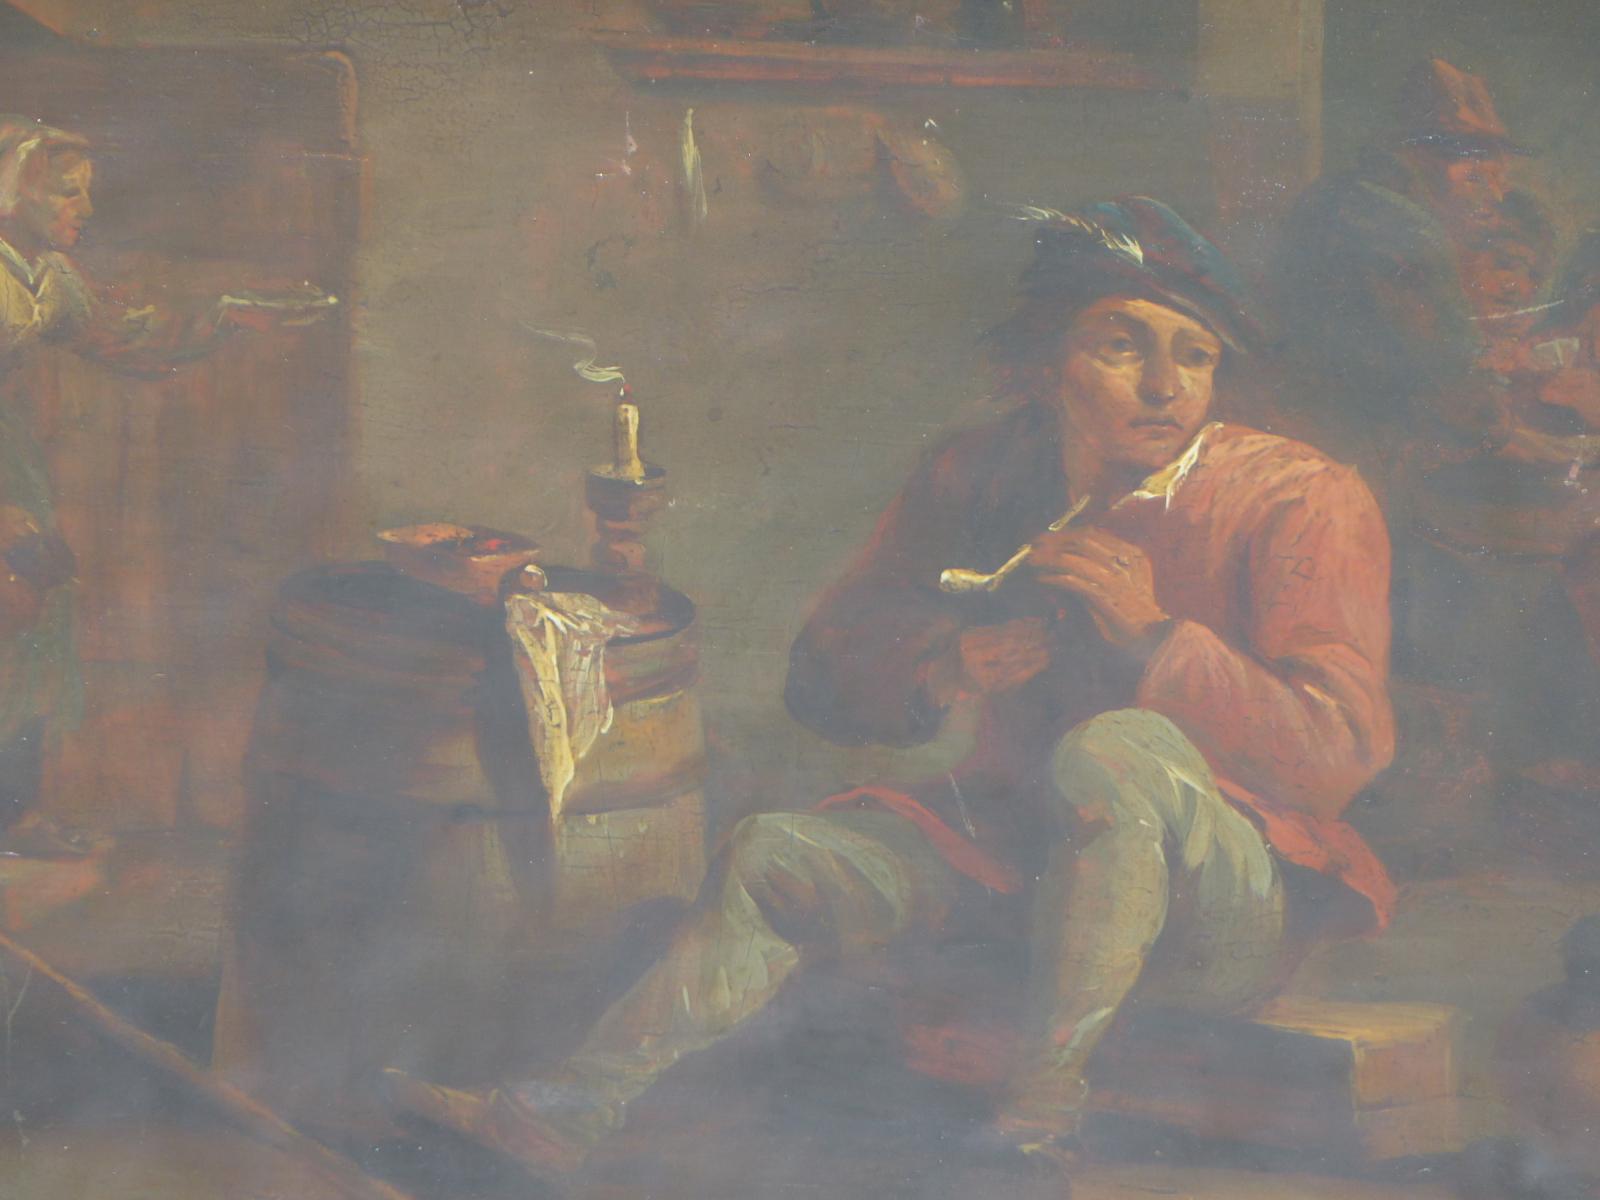 MANNER OF DAVID TENIERS THE YOUNGER, A PIPE SMOKER IN A TAVERN INTERIOR, OIL ON OAK PANEL, 24 x 18. - Image 4 of 8